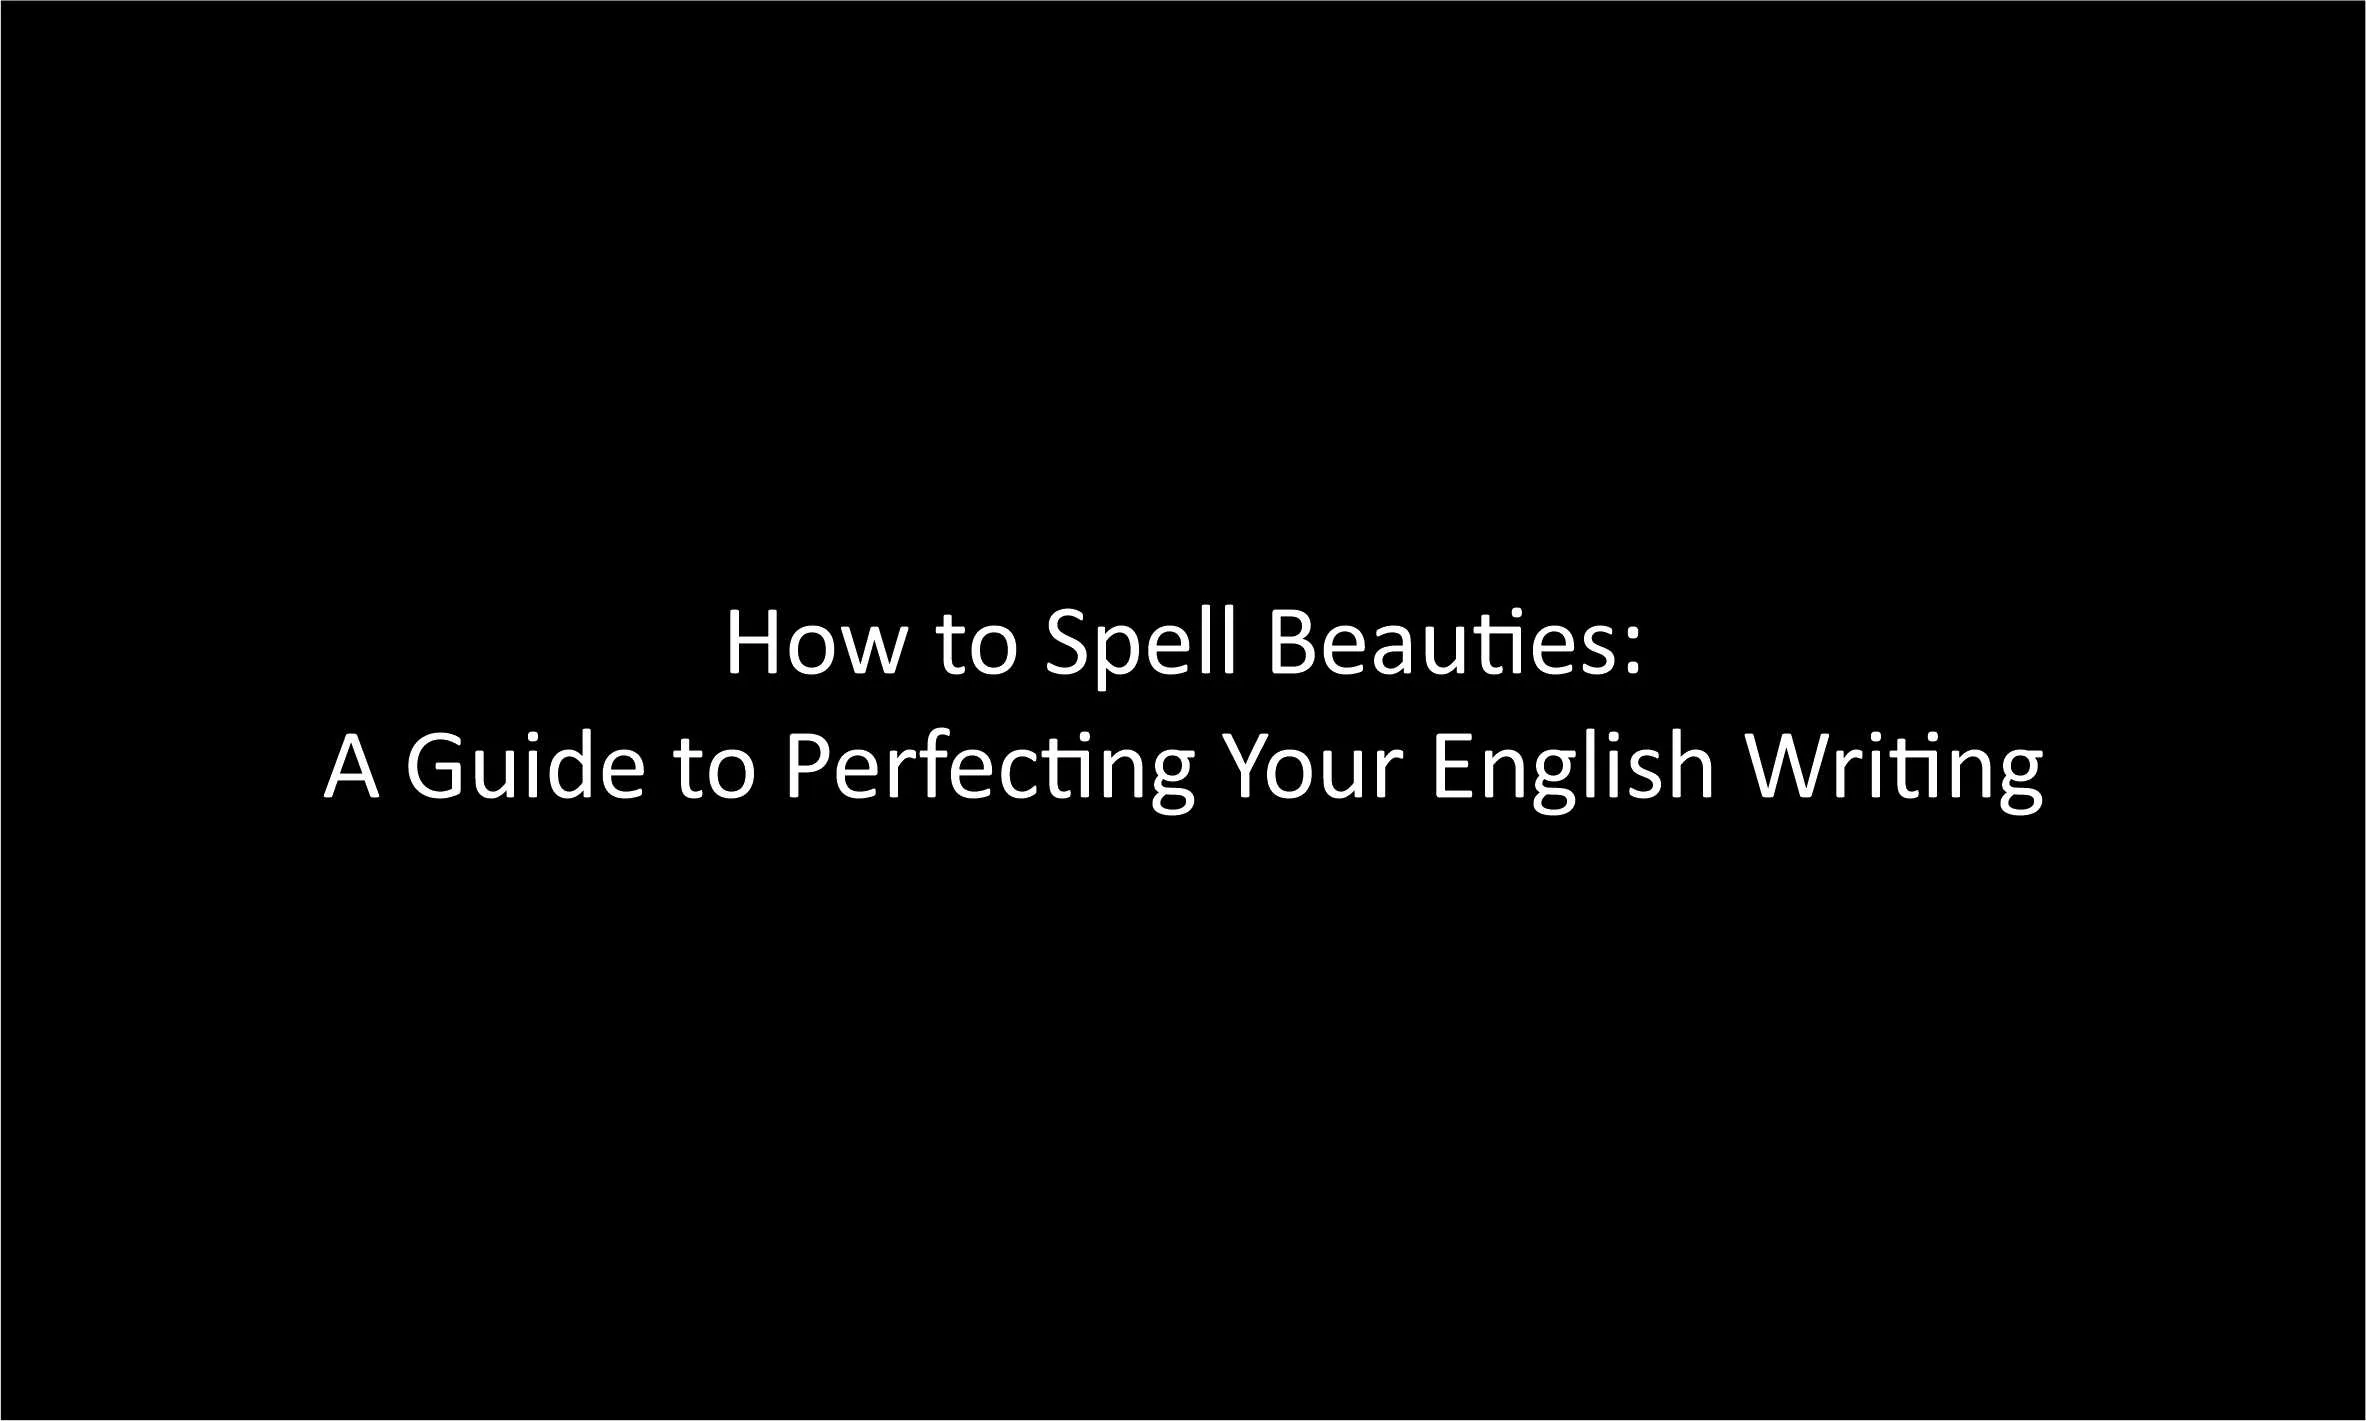 How to Spell Beauties